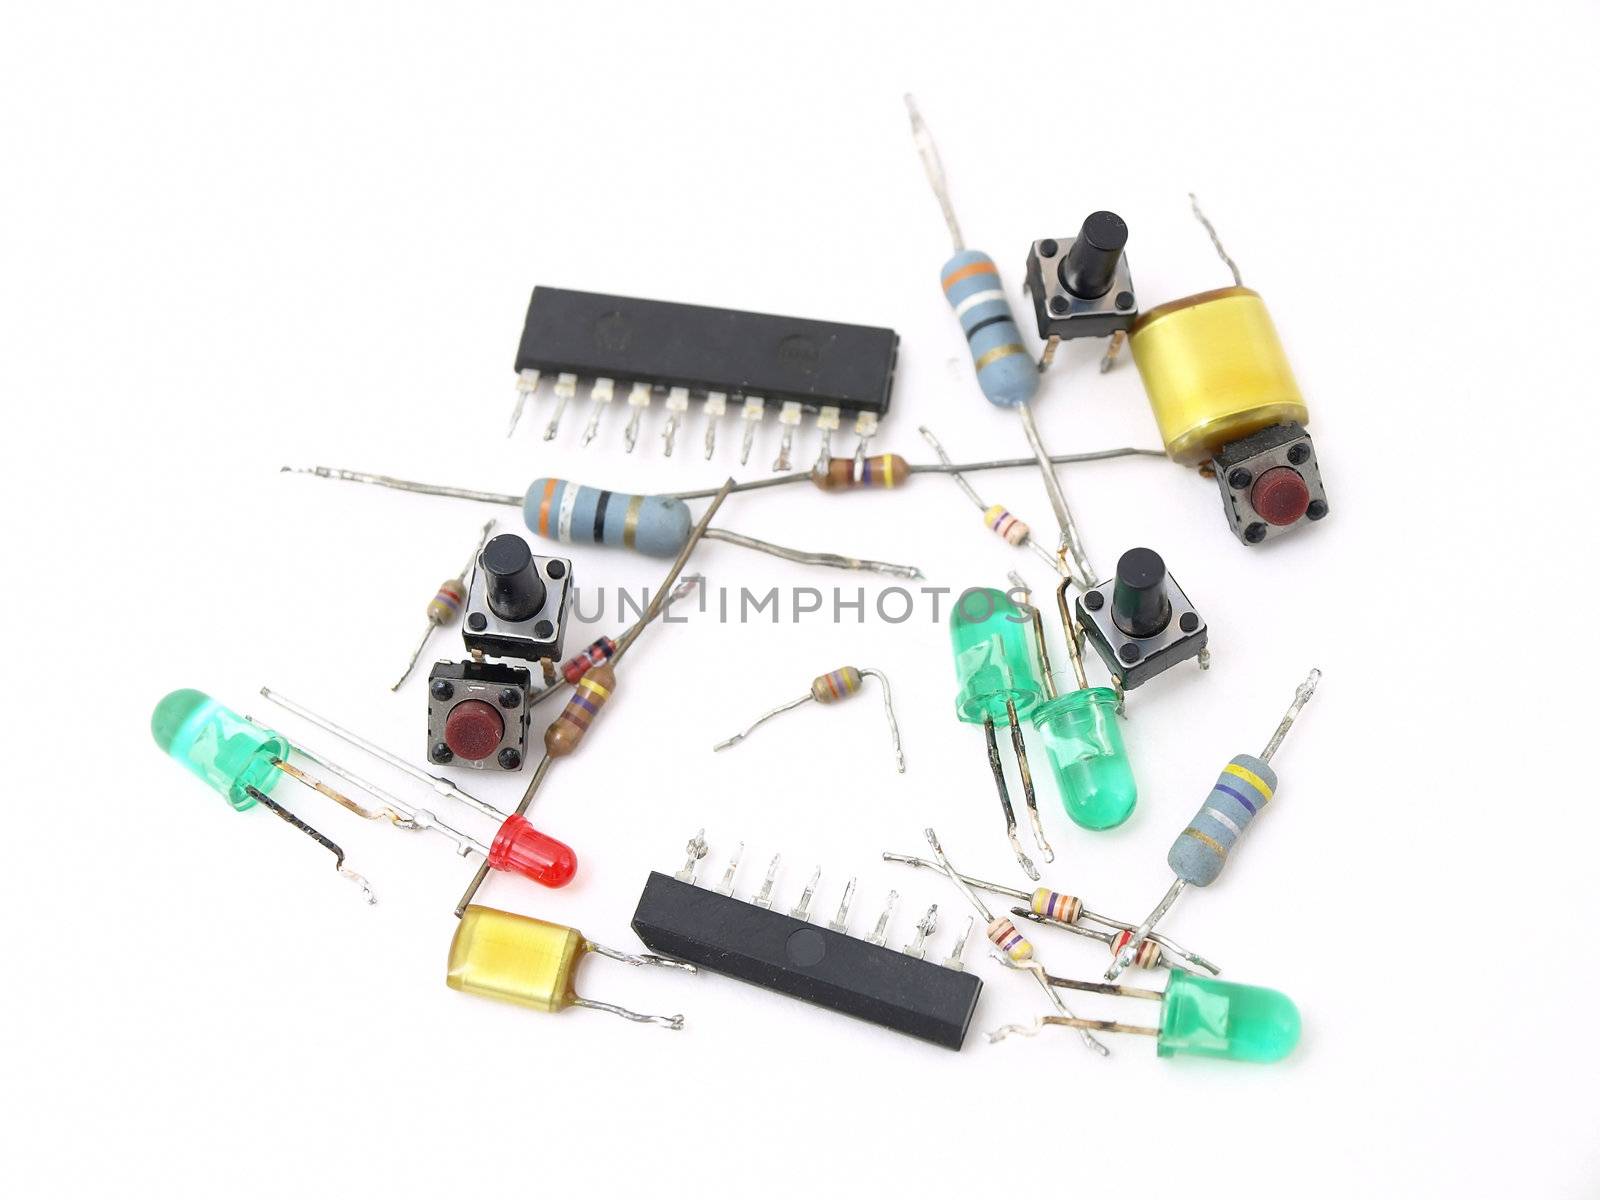 A variety of switches and LED light pieces isolated on a white background.